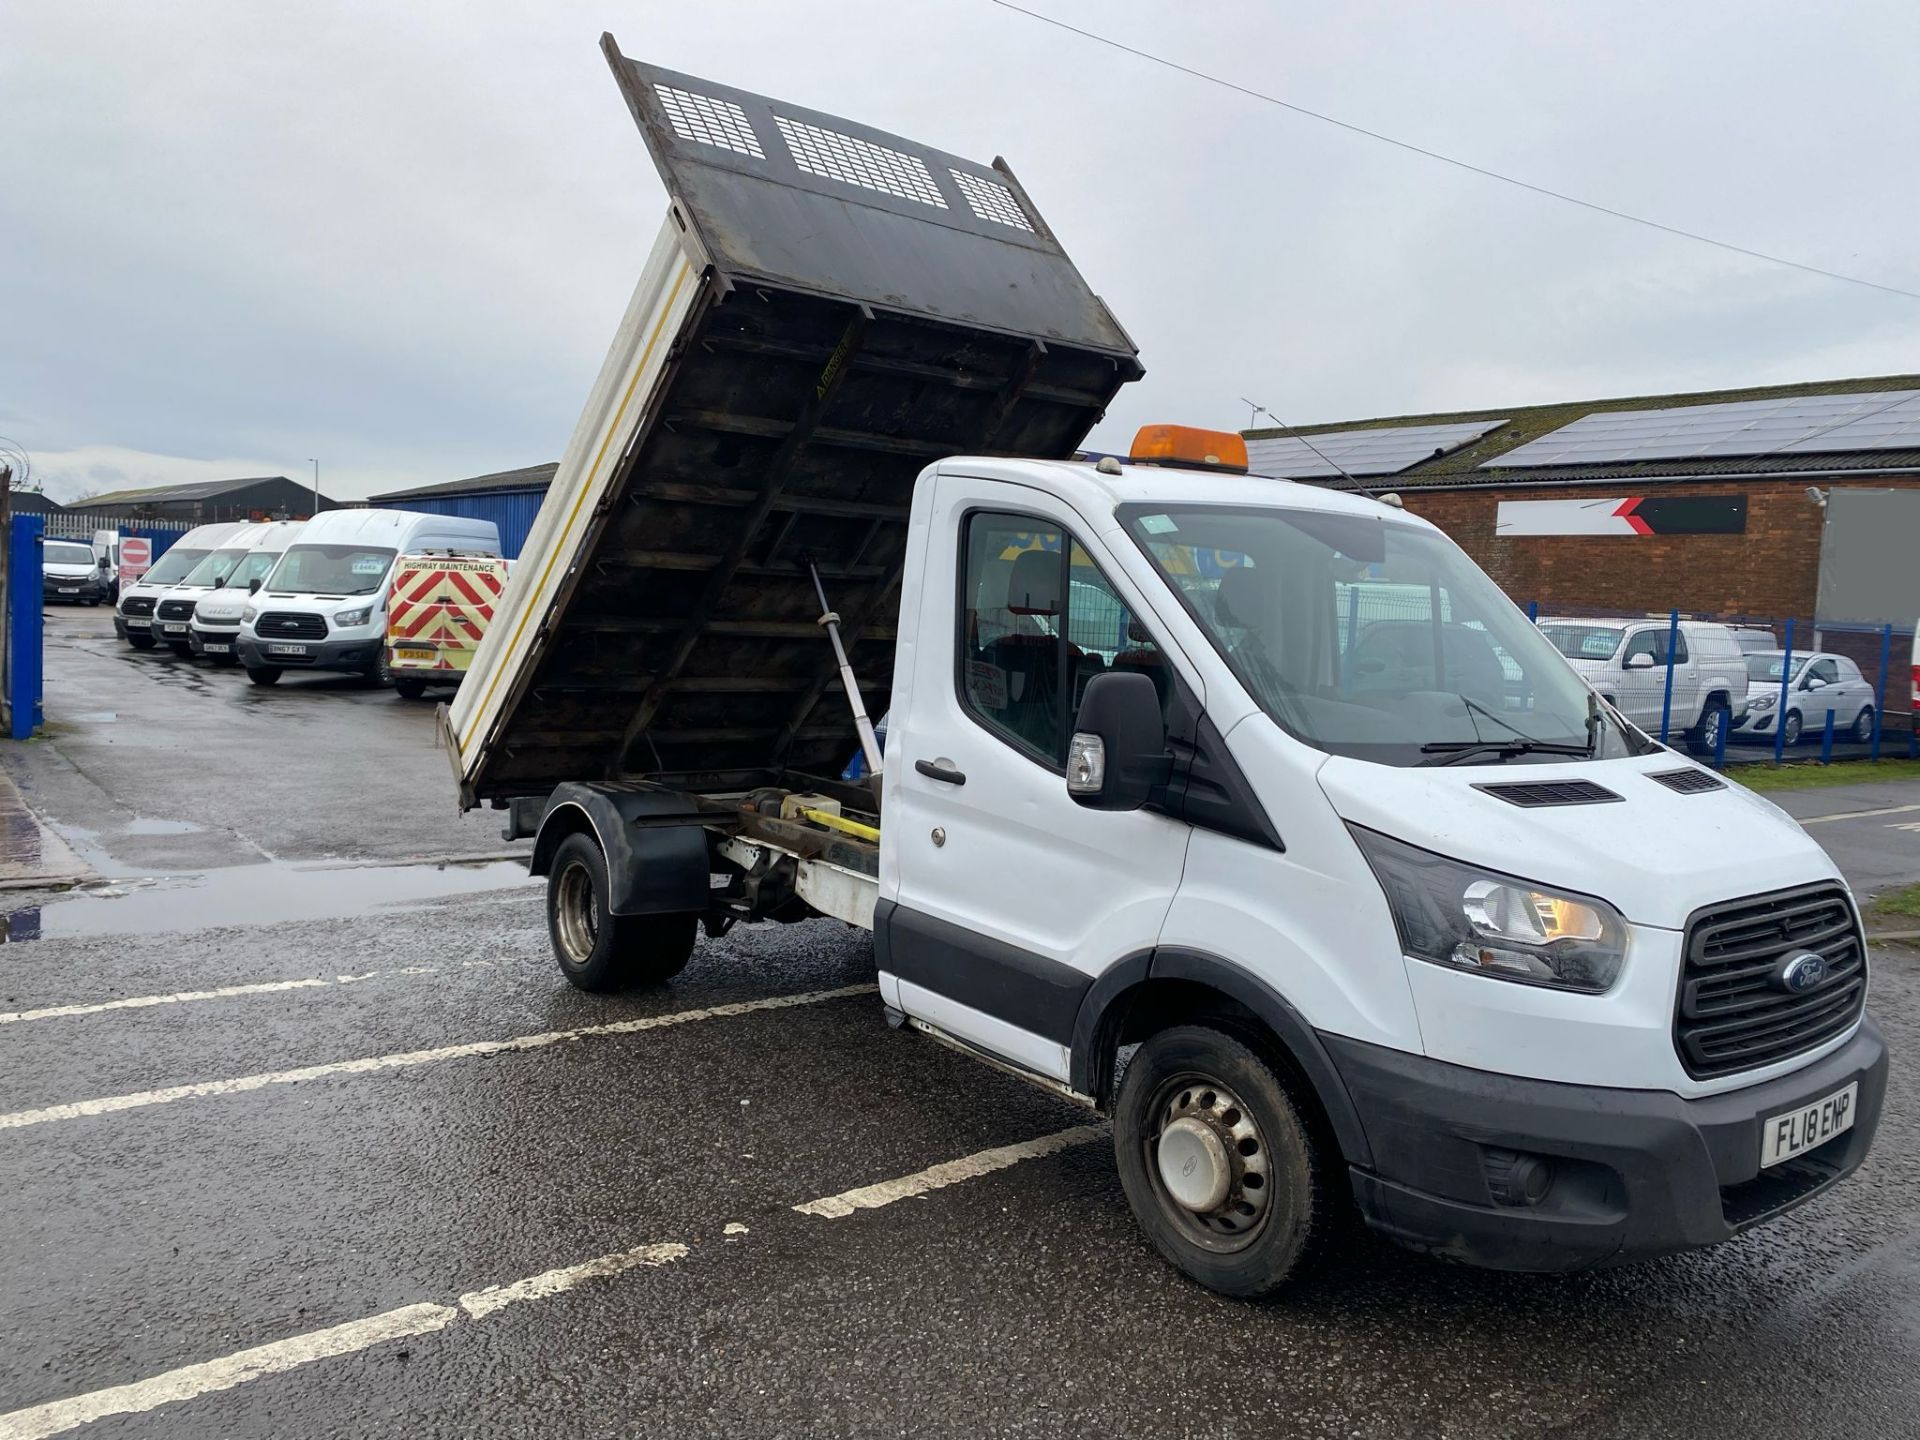 2018 18 FORD TRANSIT TIPPER - 135K MILES - EURO 6 - TWIN REAR WHEEL. - Image 4 of 10